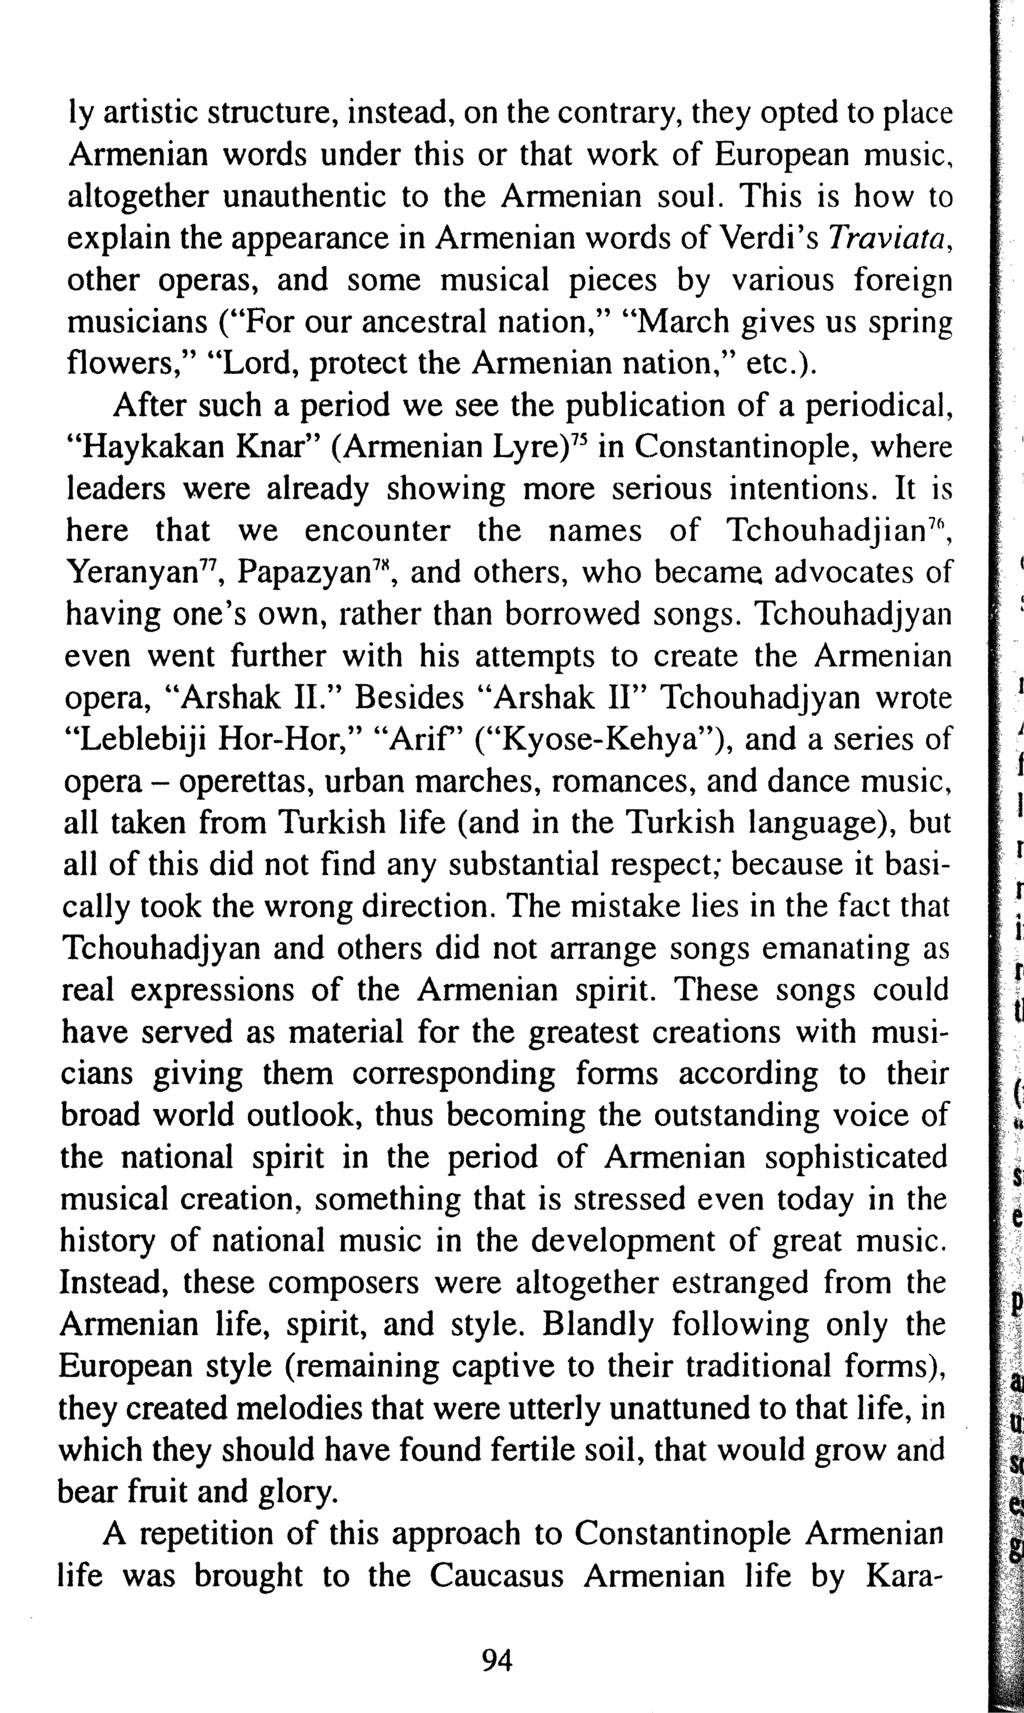 ly artistic structure, instead, on the contrary, they opted to place Armenian words under this or that work of European music, altogether unauthentic to the Armenian soul.